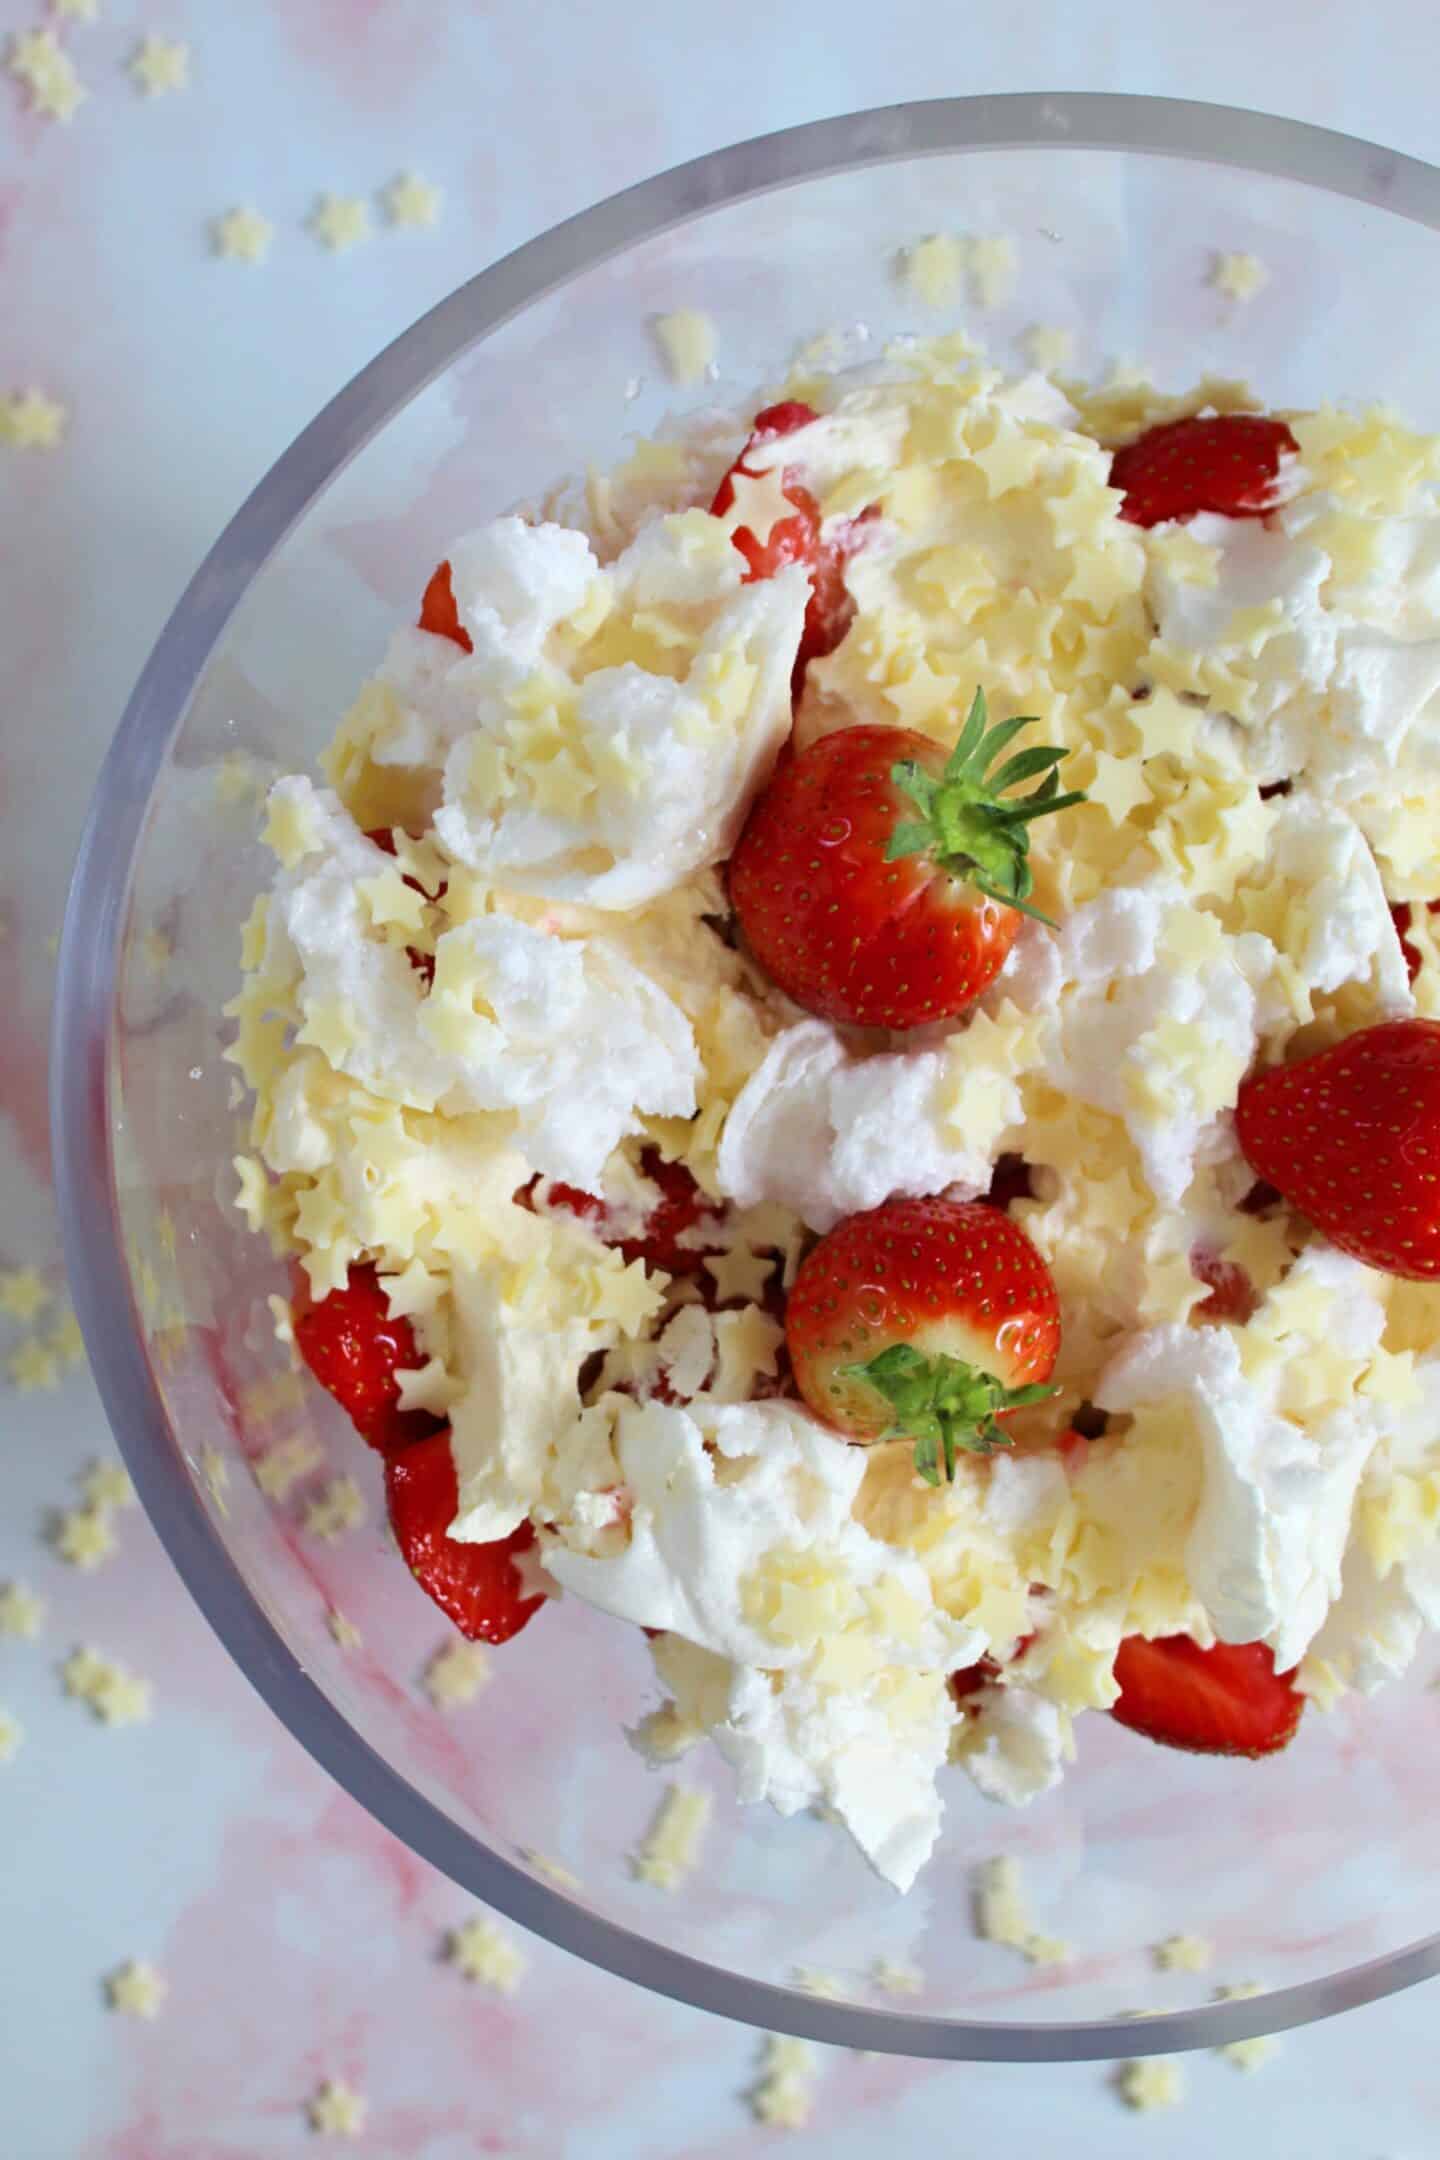 A bowl of Eton mess with white chocolate stars on top.